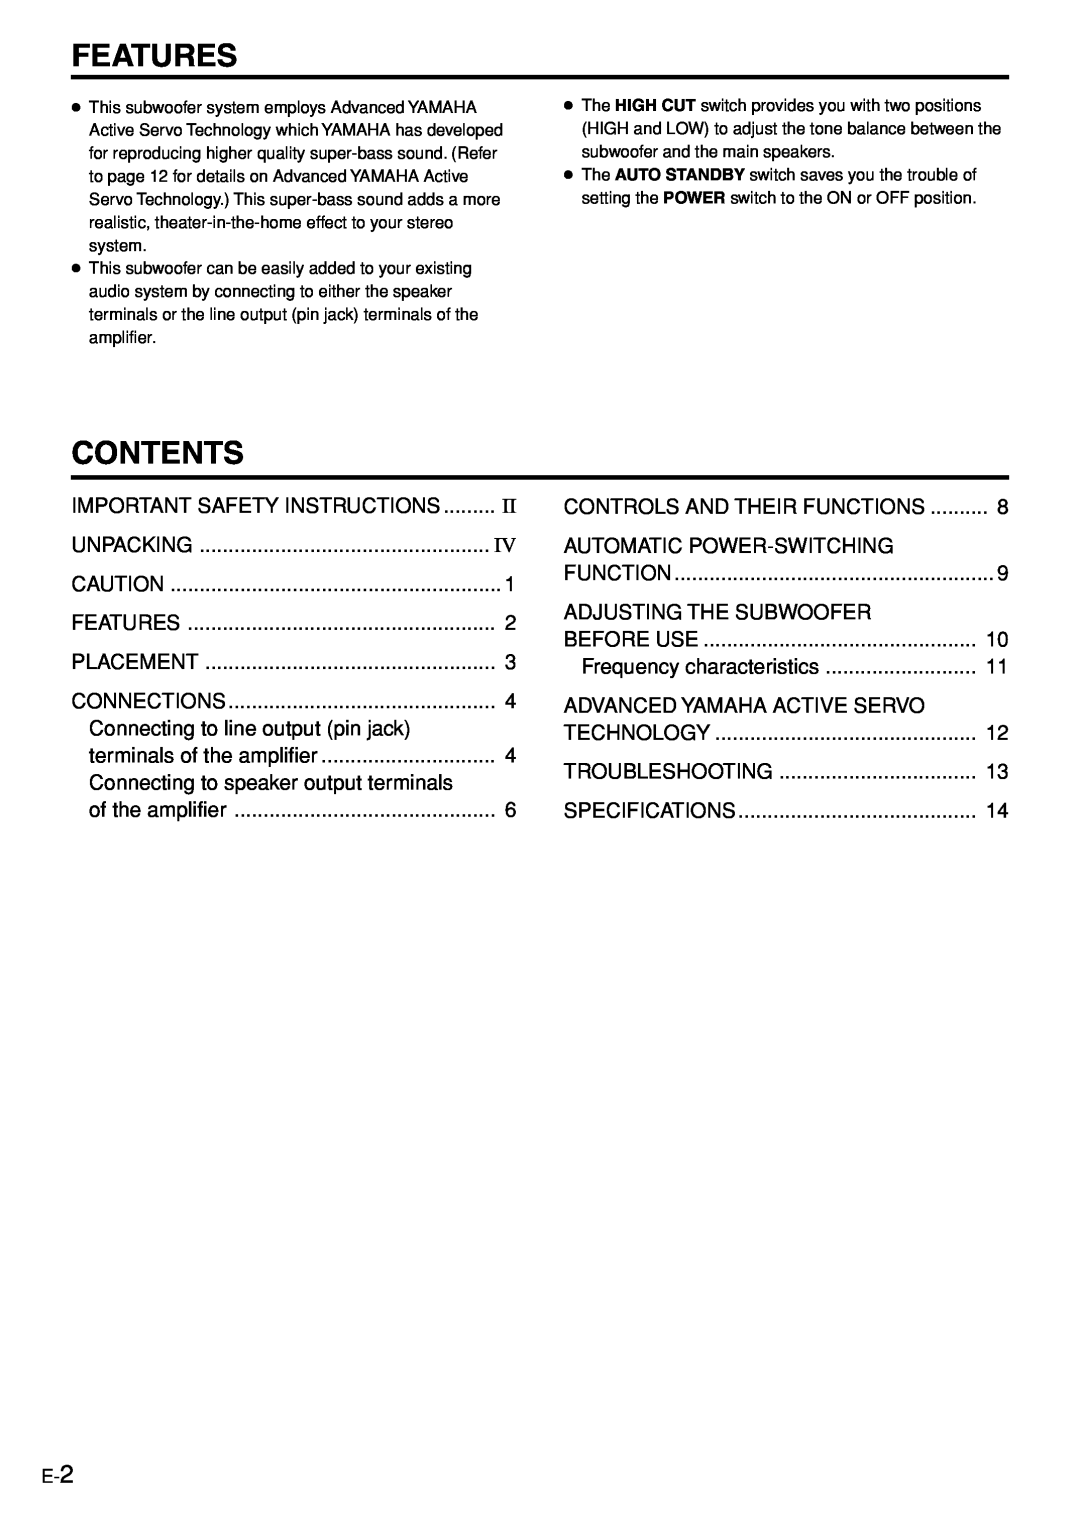 Yamaha YST-SW005 owner manual Features, Contents 